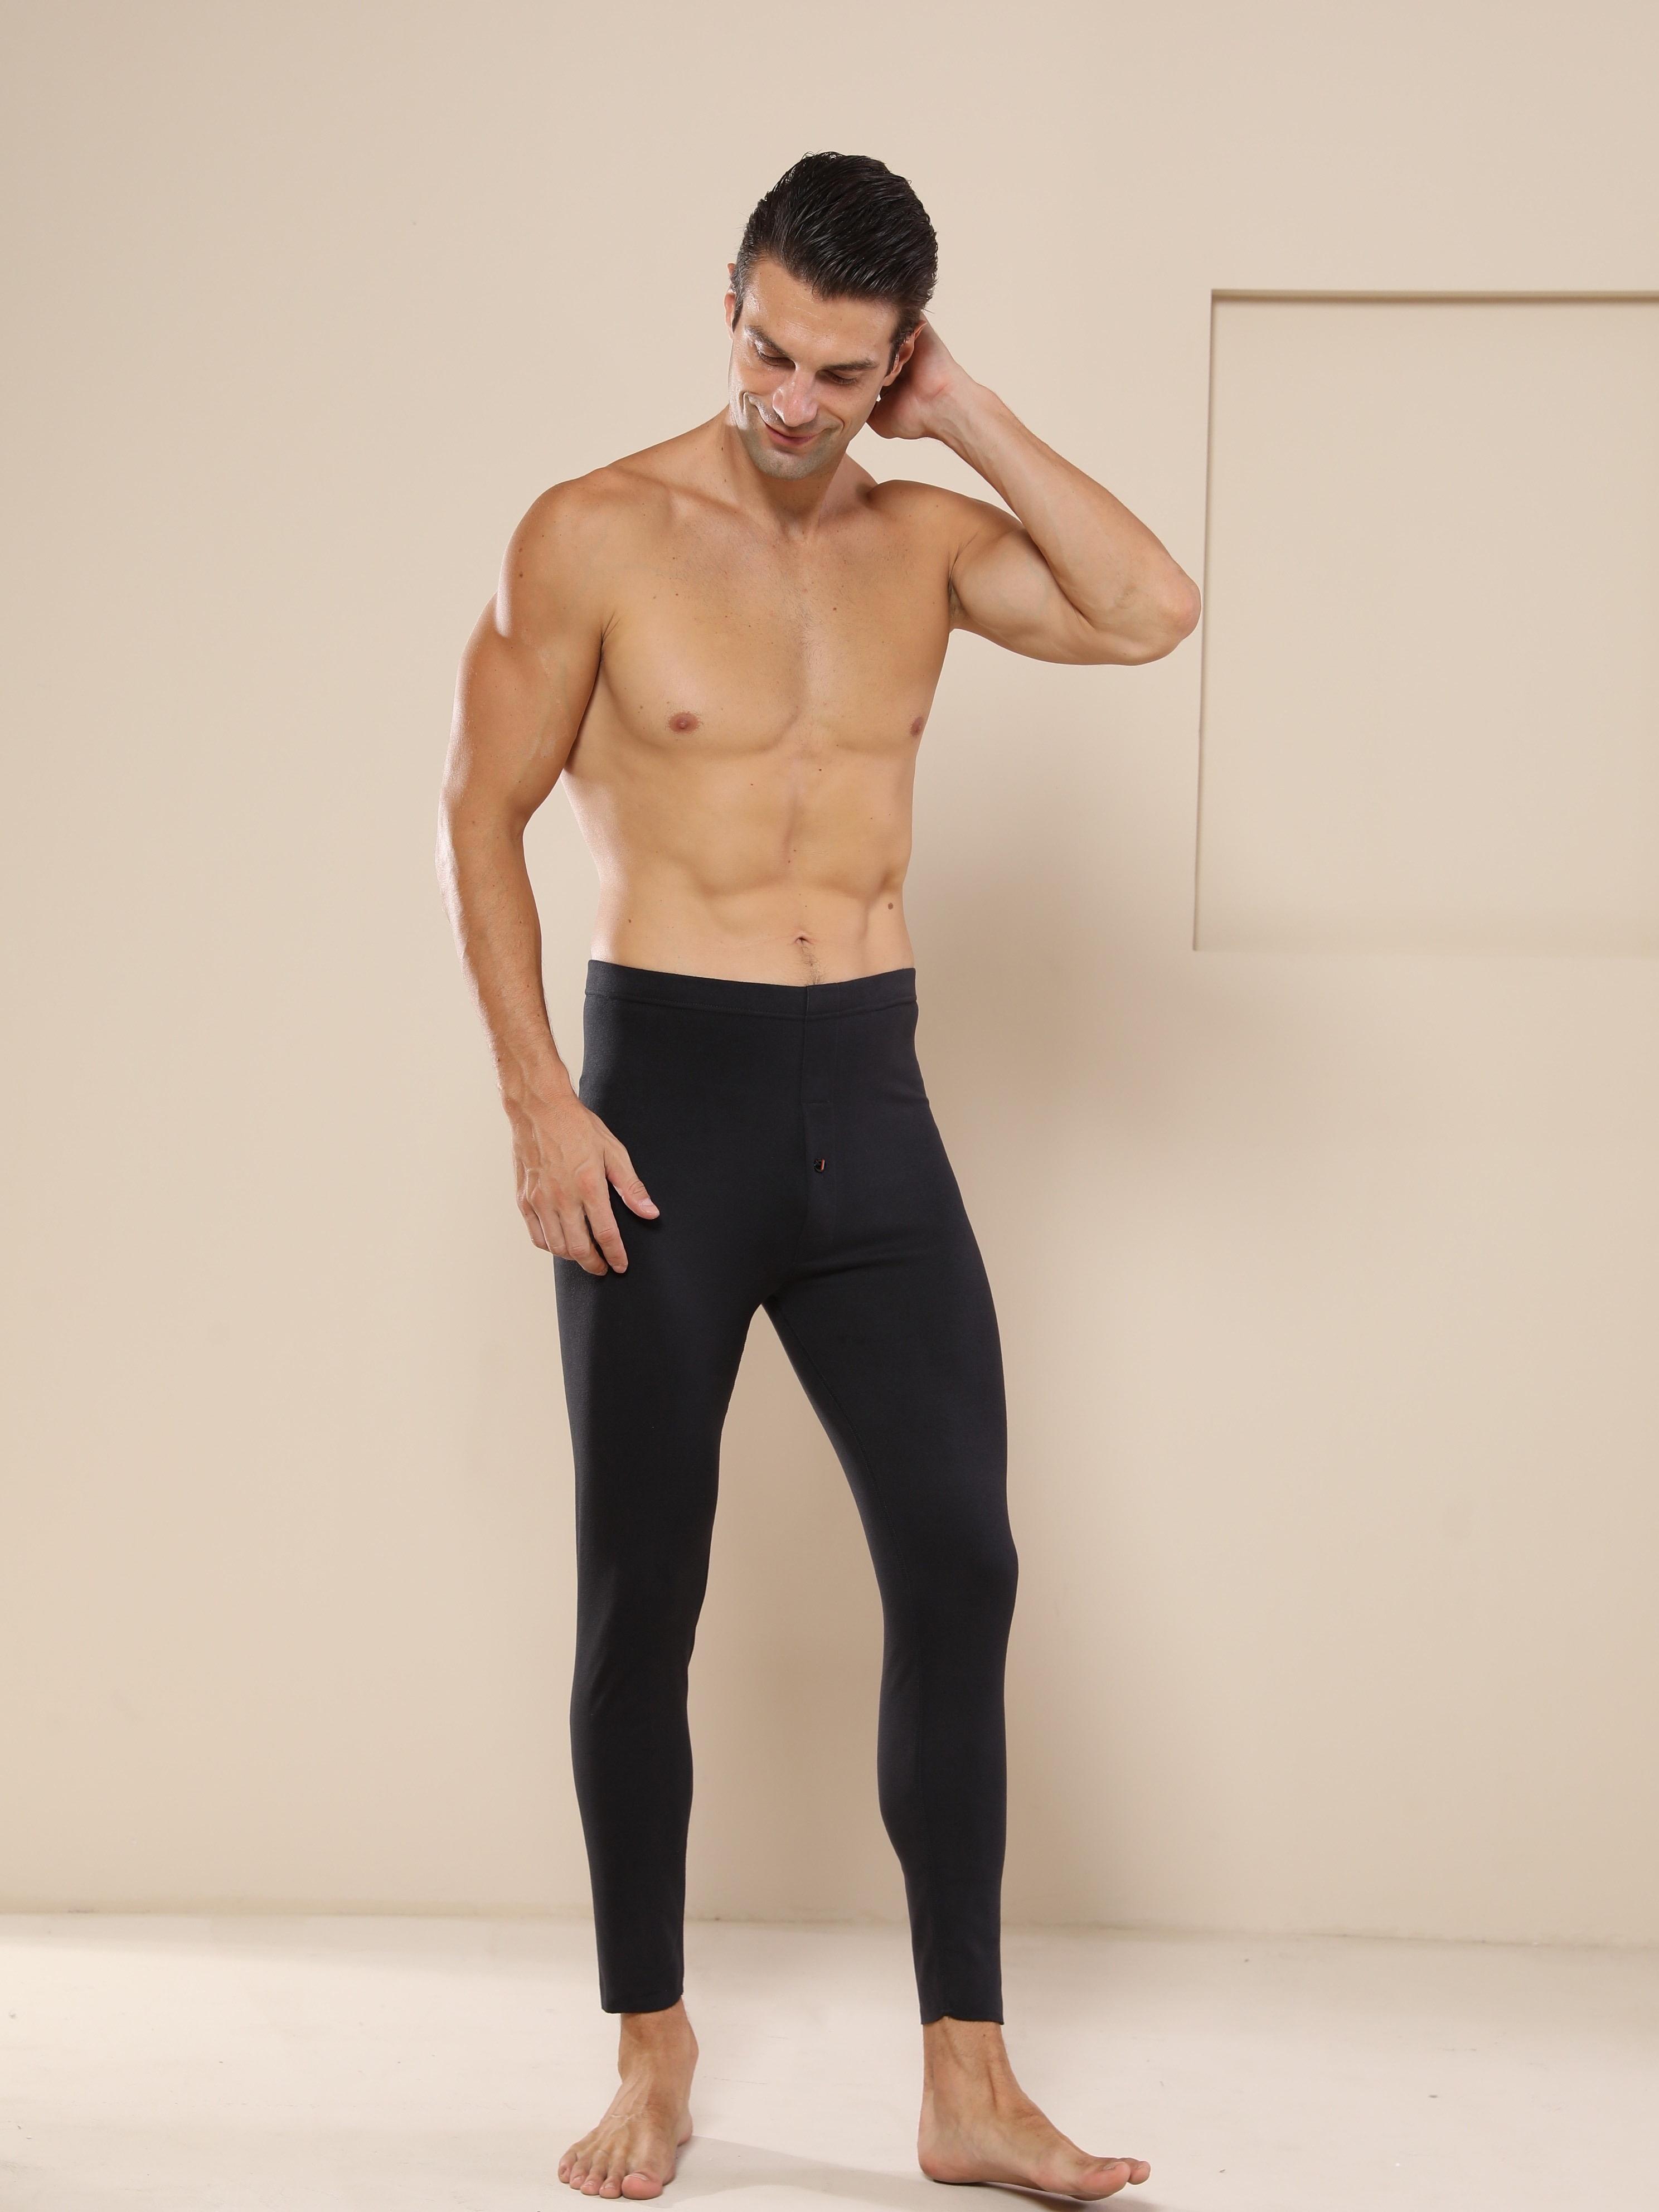 Seamless warmth technical ankle-length leggings